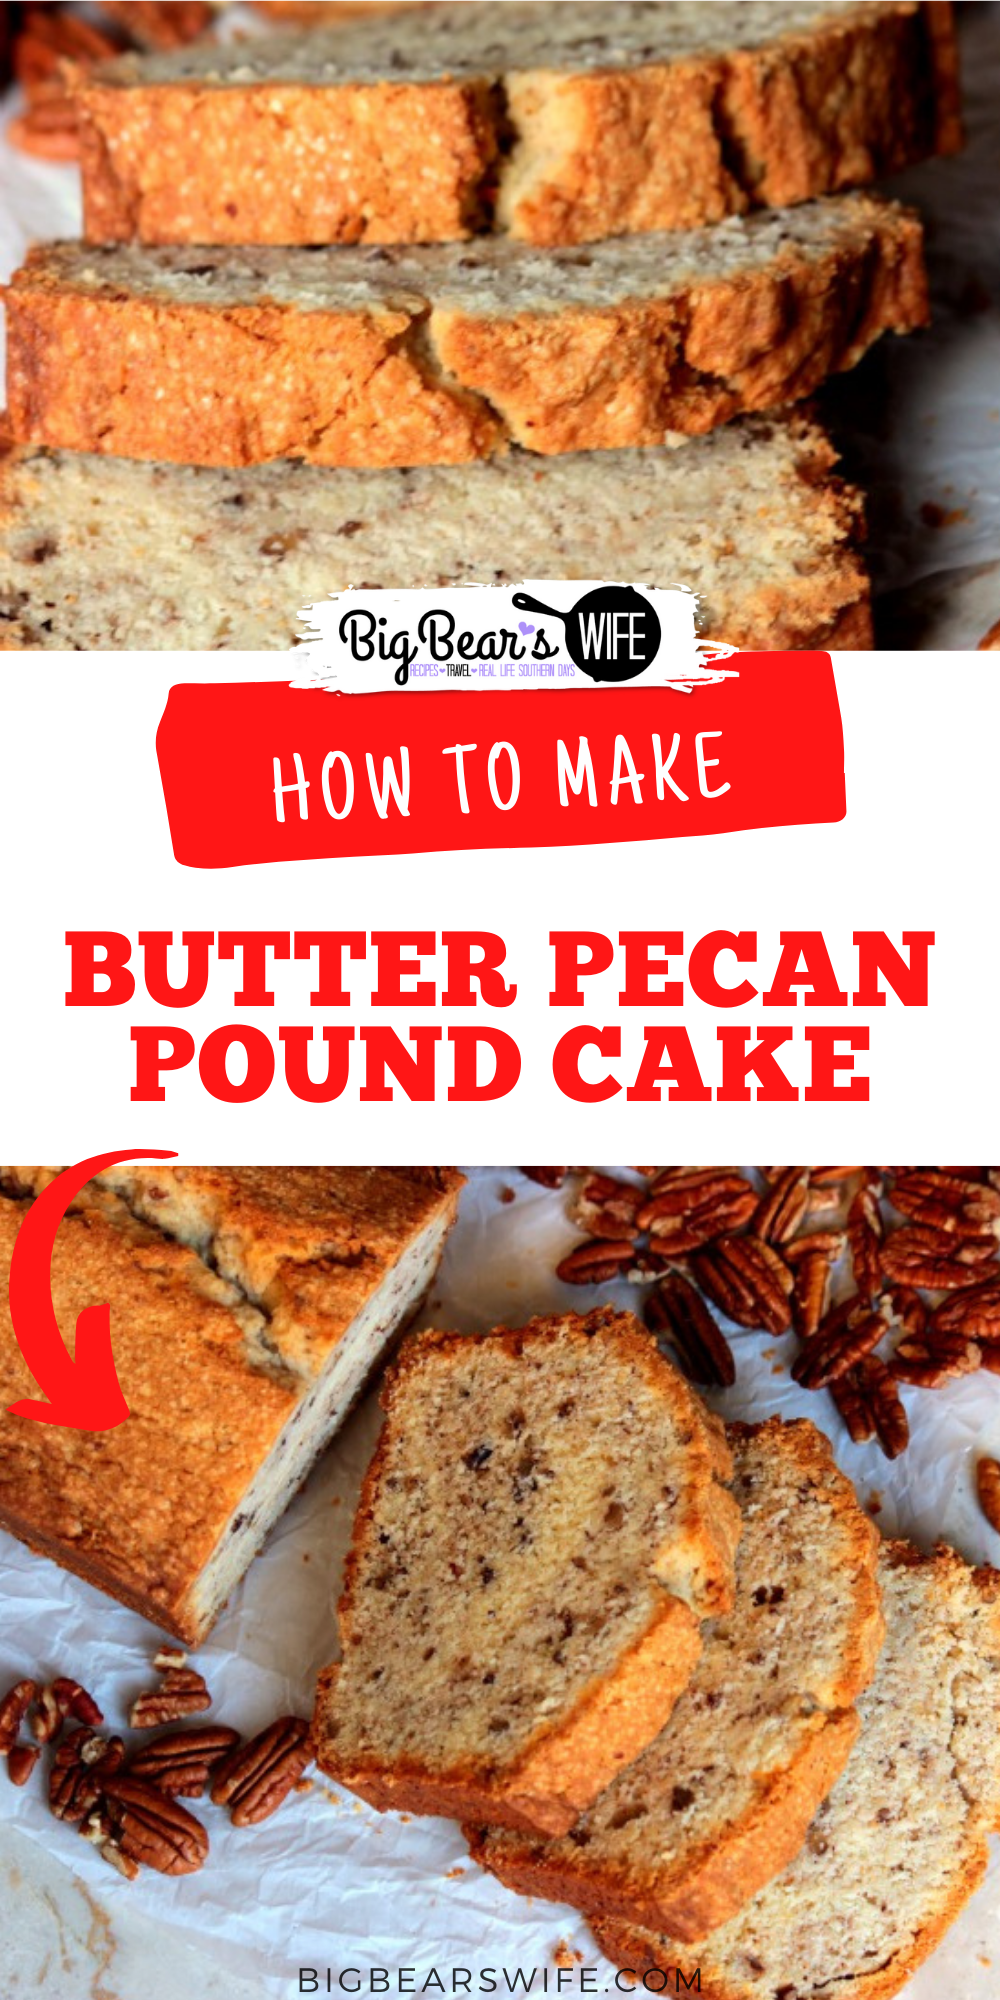 Butter Pecan Pound Cake - A perfect pound cake to whip up for your family or as a gift for friends! This homemade Butter Pecan Pound Cake is delicious and it's my version of a favorite pound cake that we get from the local farmer's market! via @bigbearswife